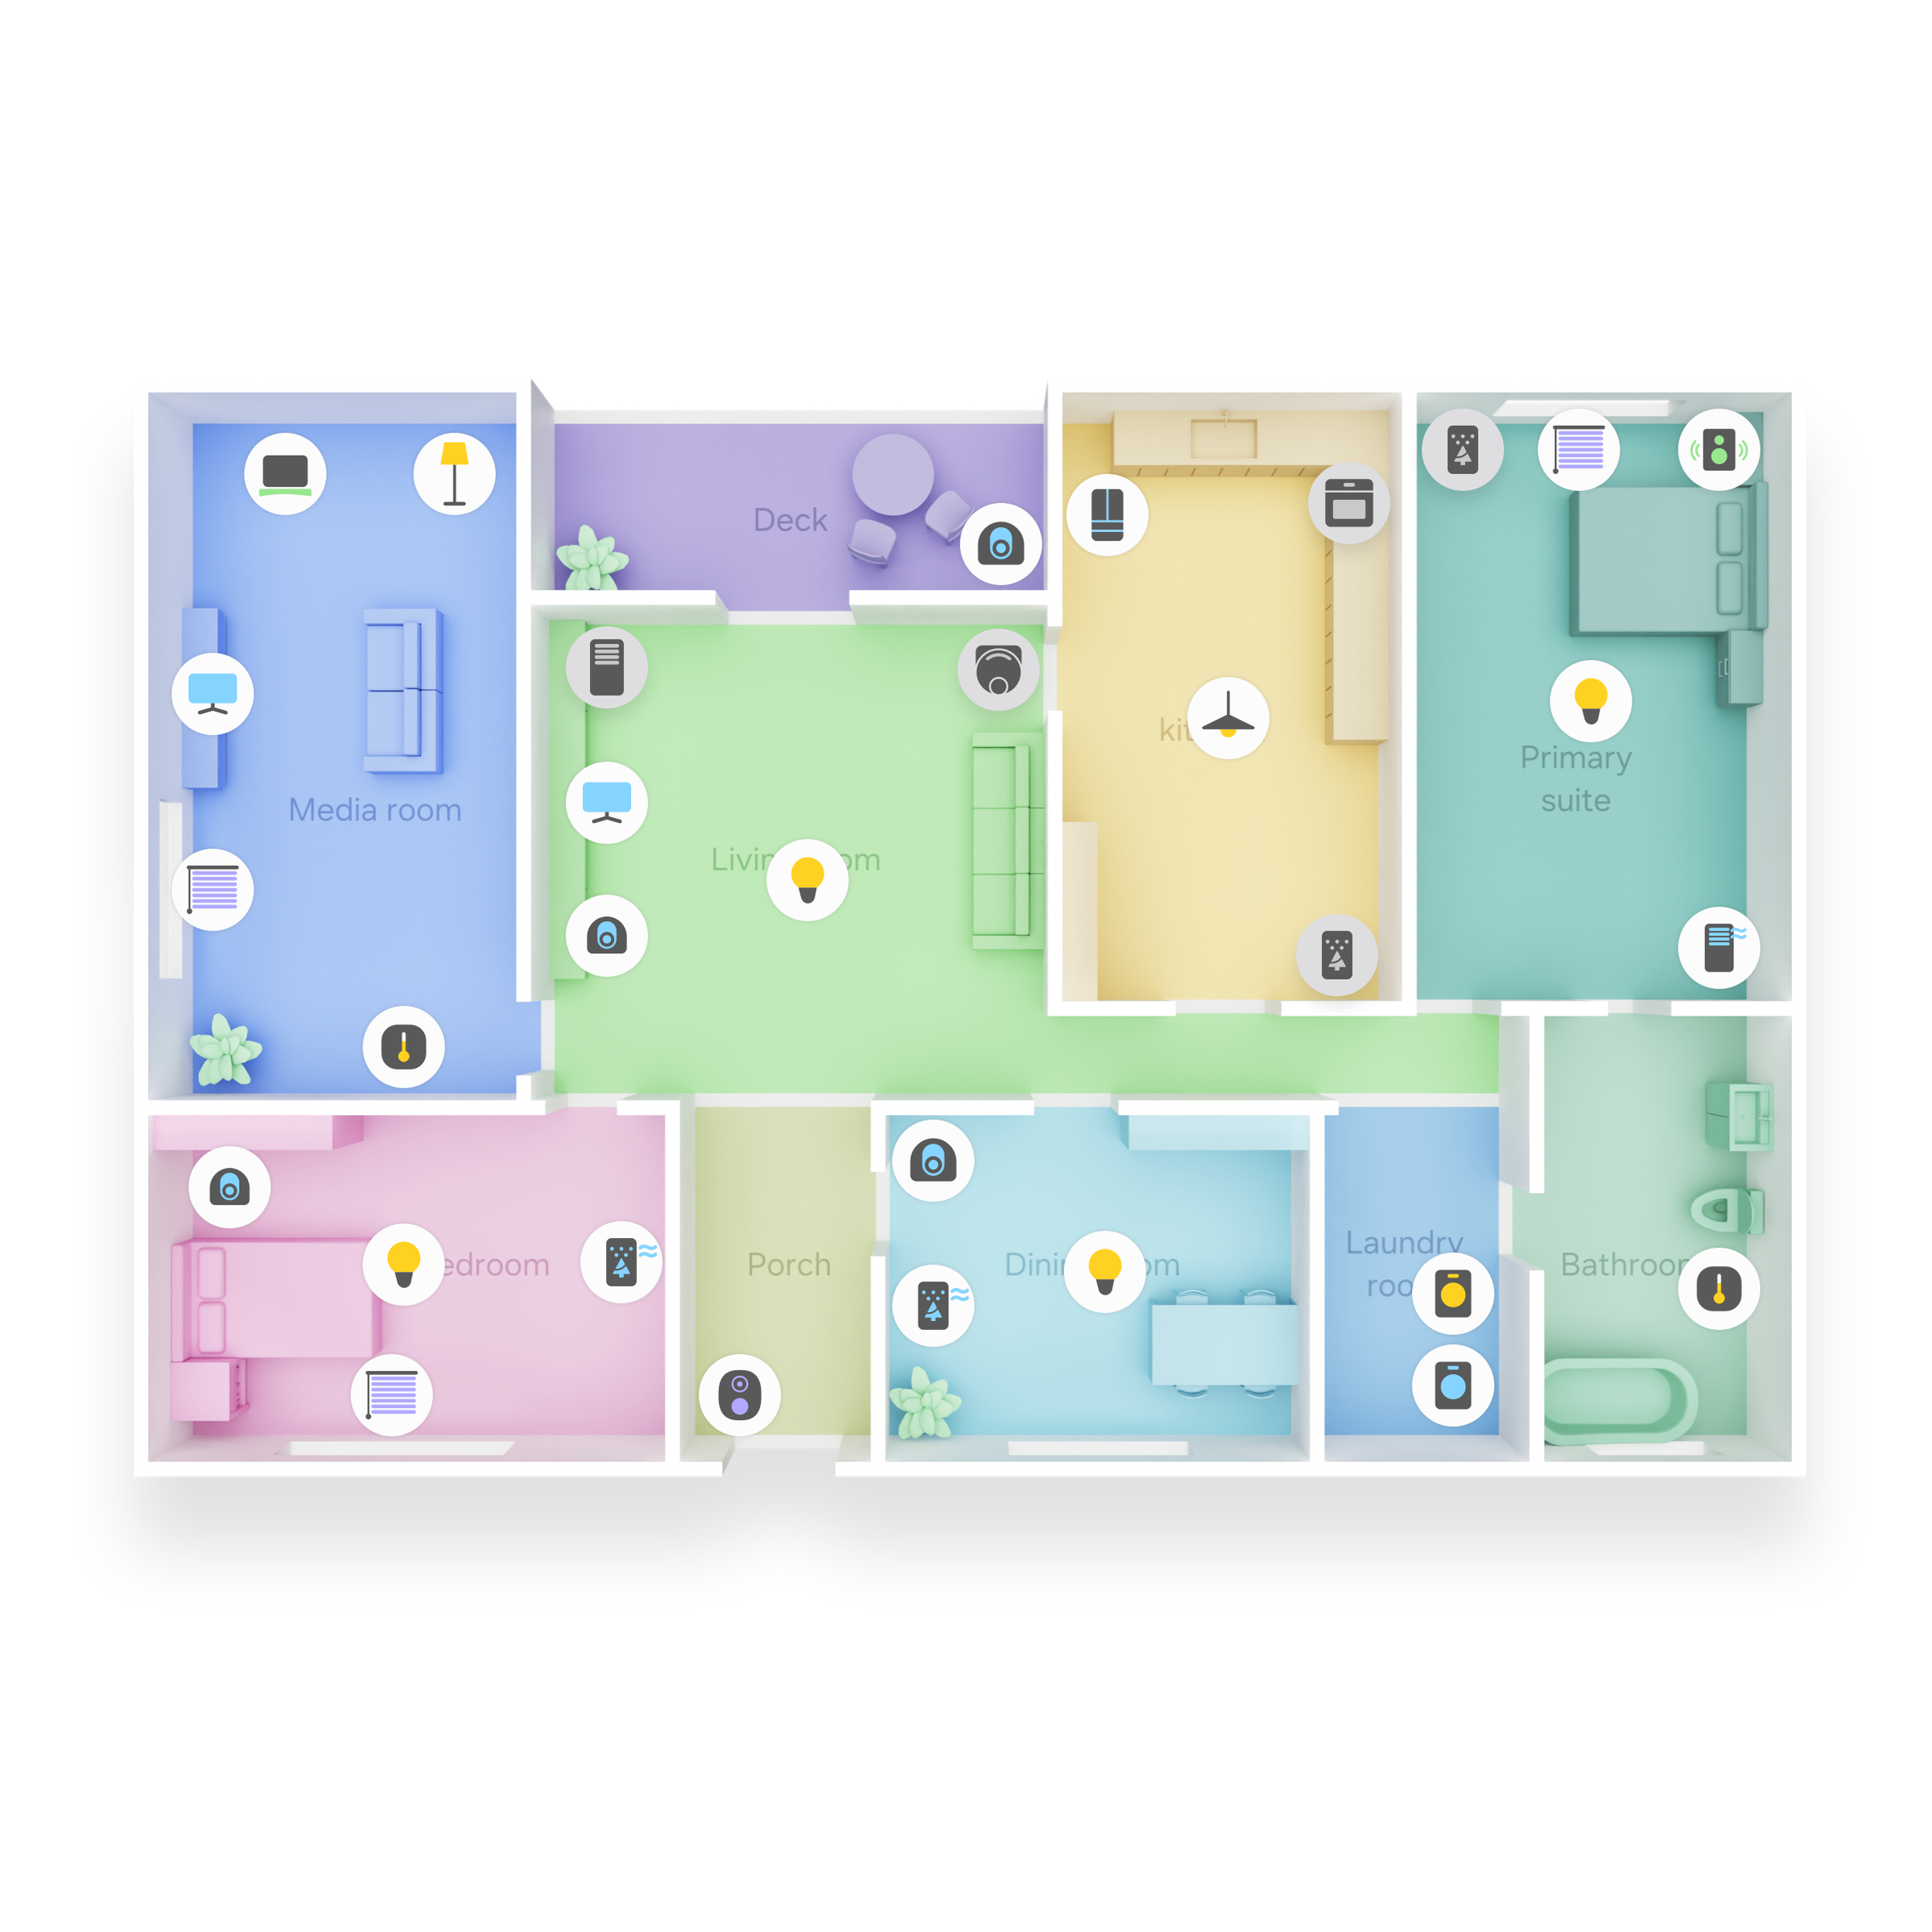 SmartThings’ Map View gives you an interactive 3D layout of your home and allows you to control connected devices.